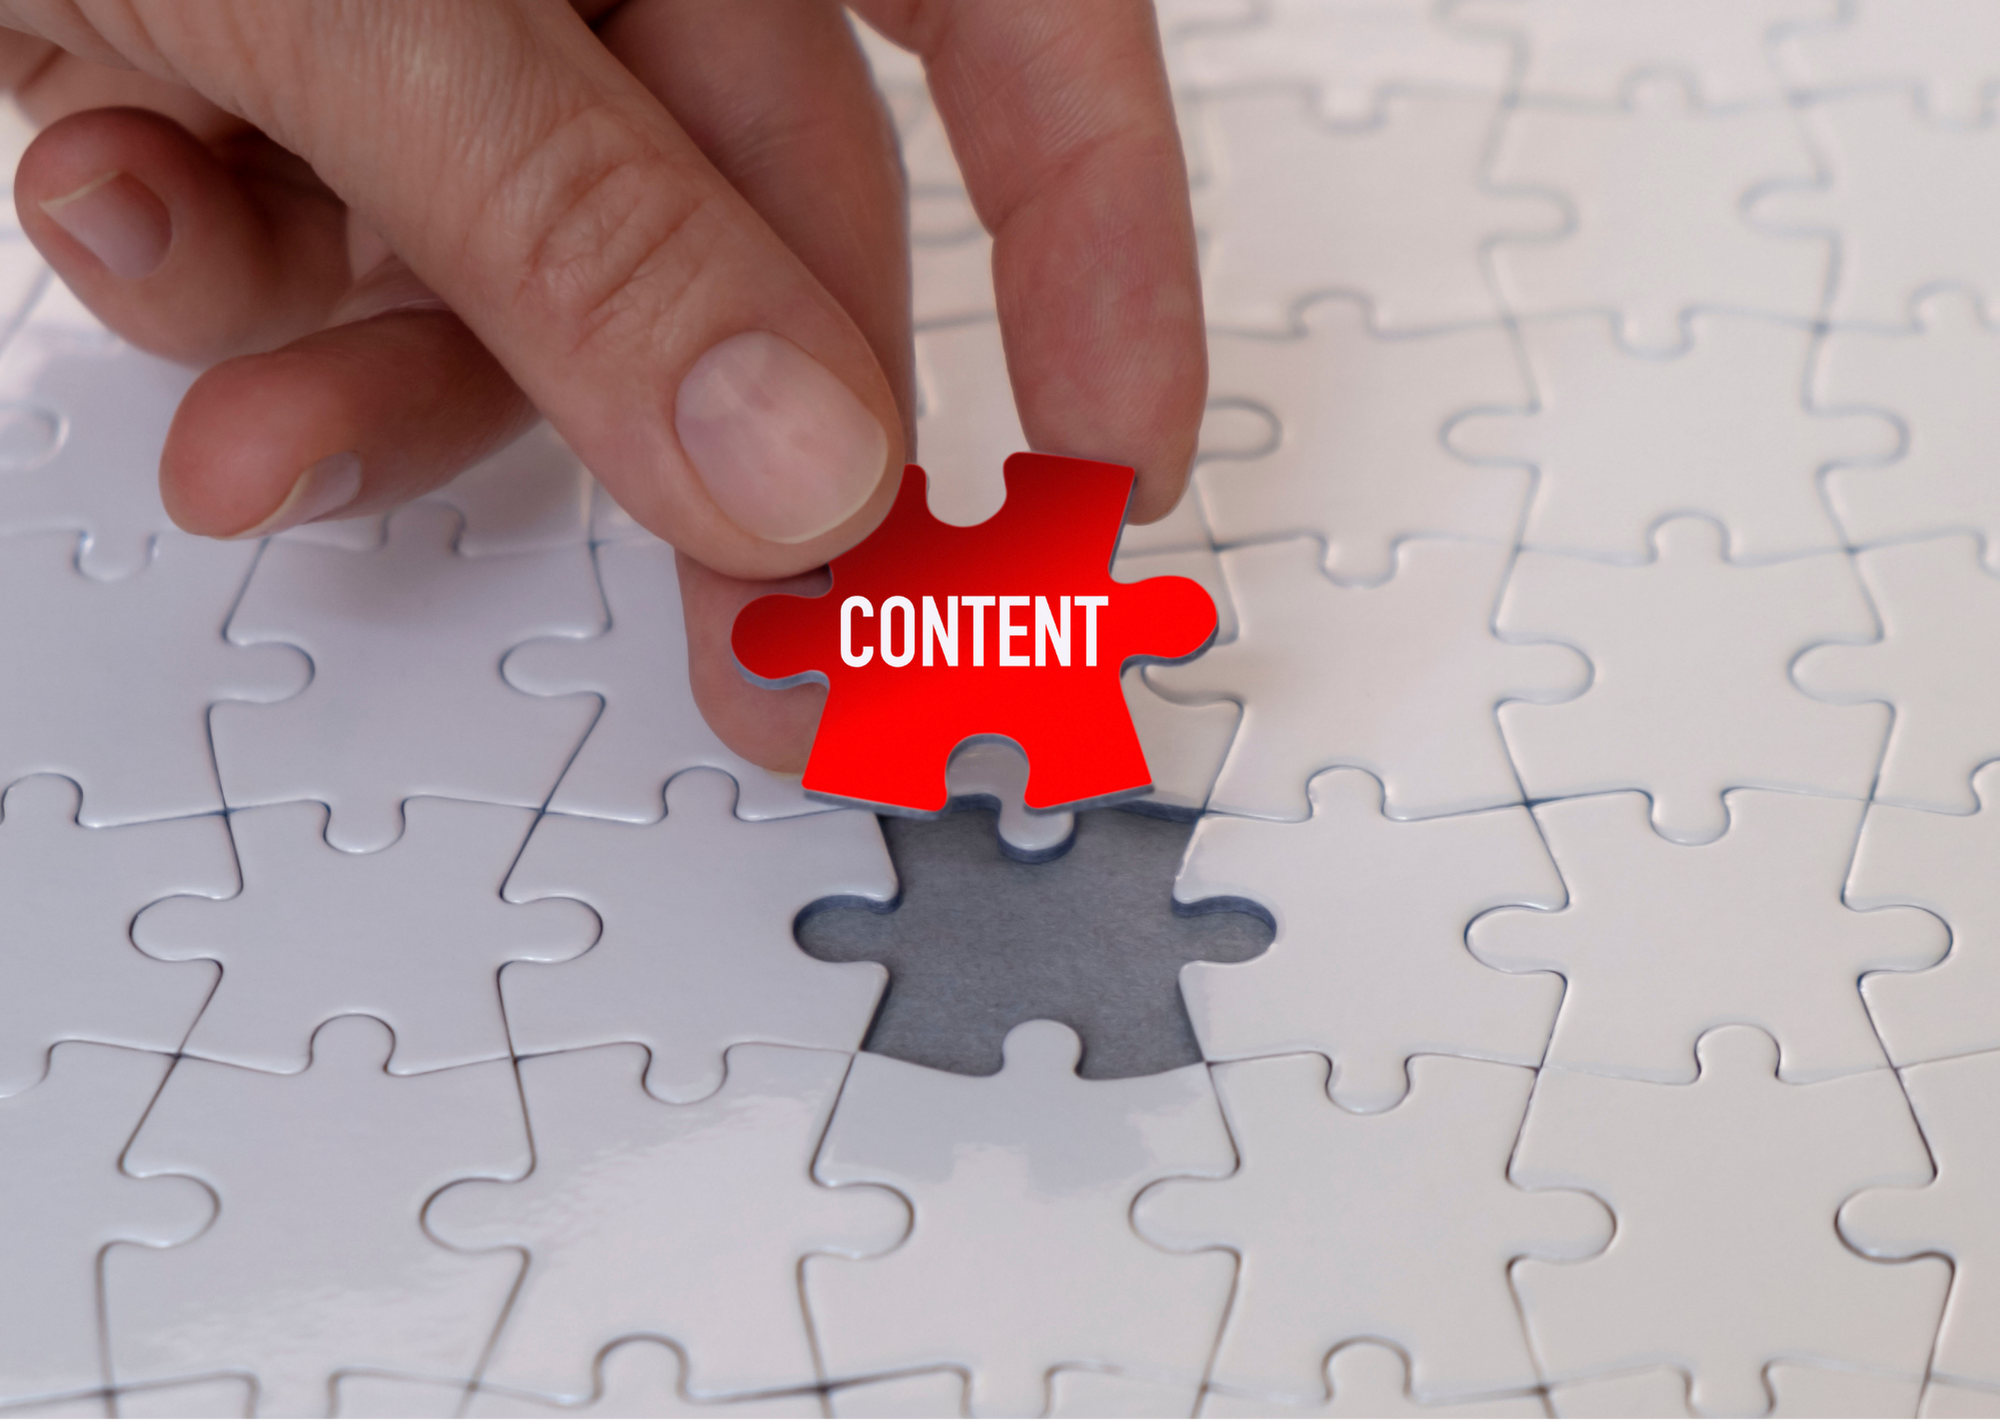 top tips for writing content people care about